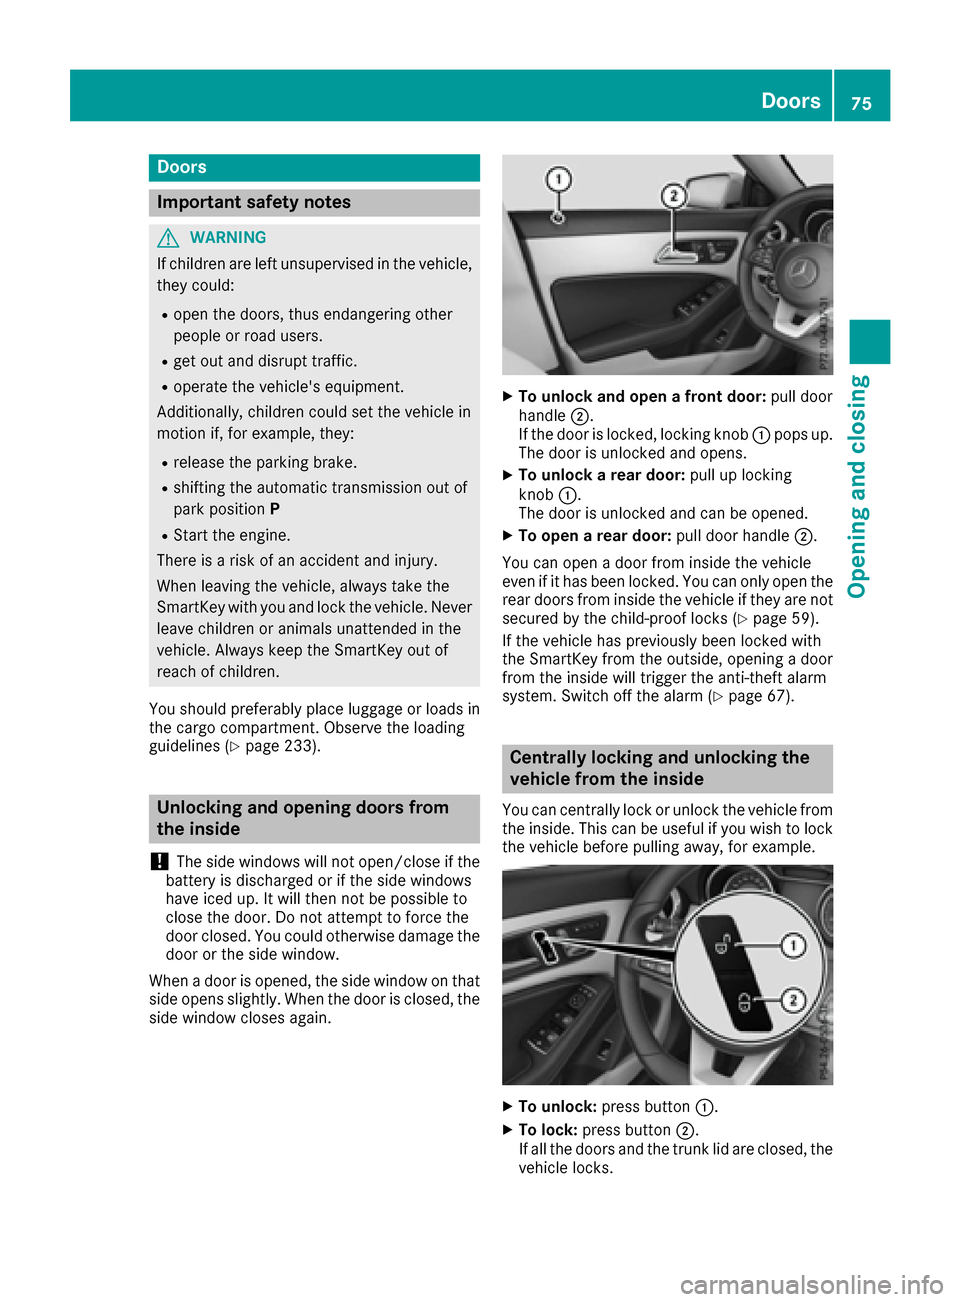 MERCEDES-BENZ CLA-Class 2017 C117 User Guide Doors
Important safet ynotes
GWARNING
If children are lef tunsupervised in th evehicle,
they could:
Rope nth edoors ,thus endangerin gother
people or road users.
Rget out and disrup ttraffic .
Roperat